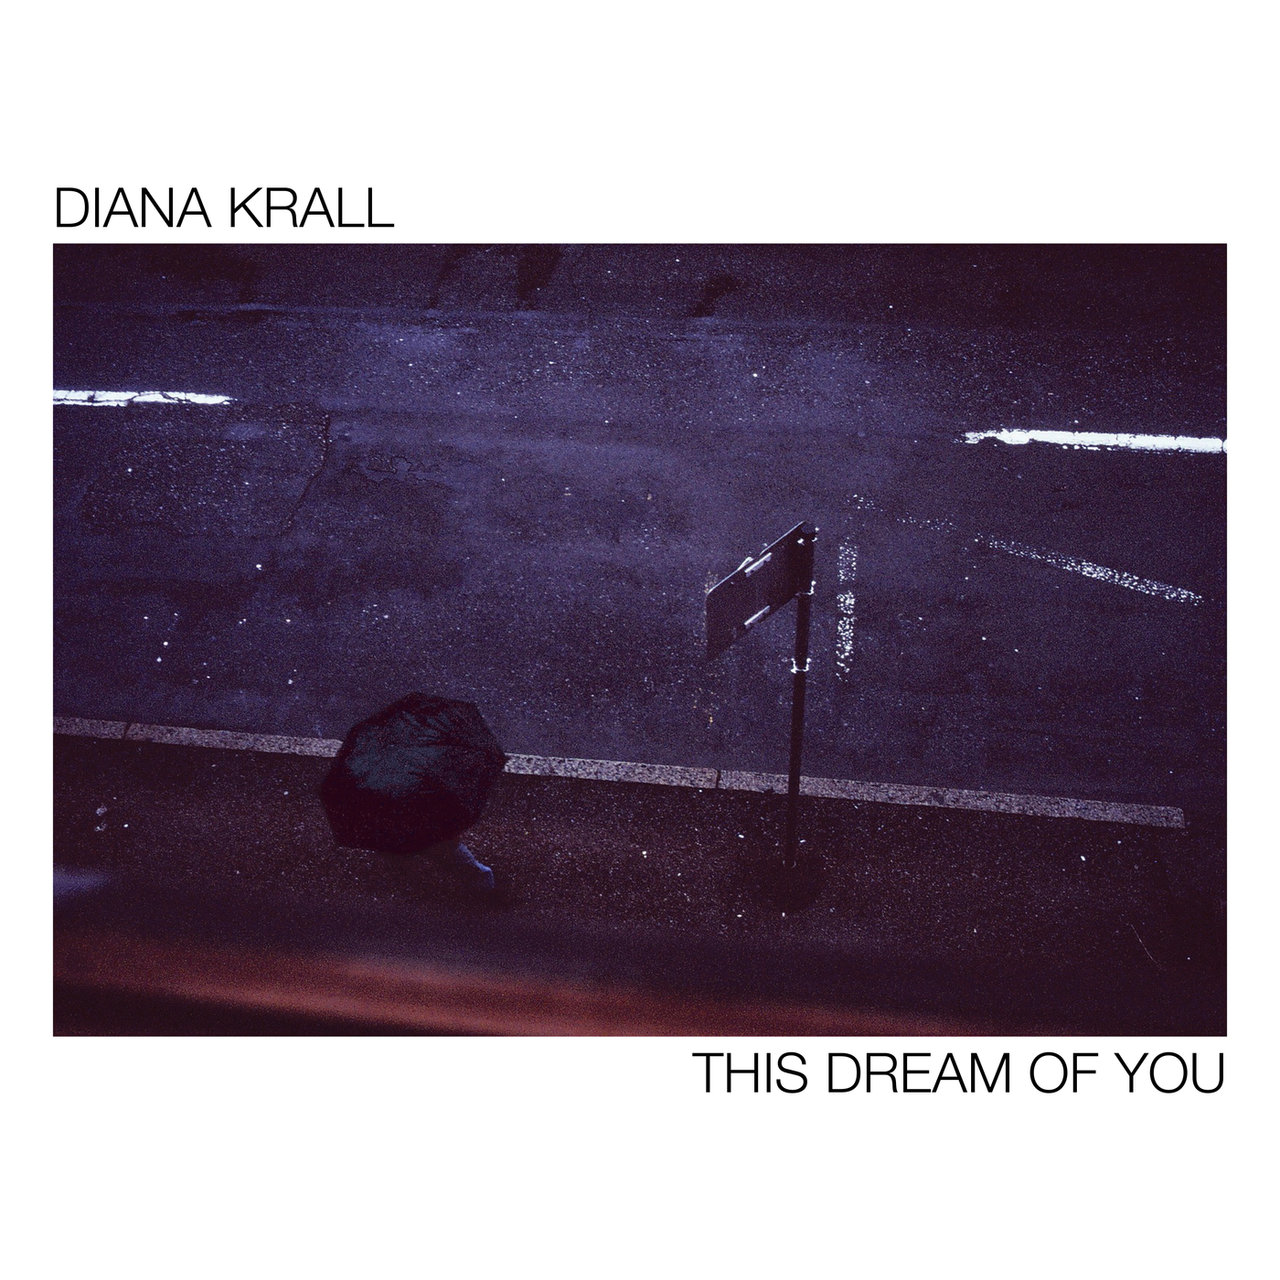 Diana Krall - This Dream Of You (2020) [FLAC 24bit/44,1kHz]